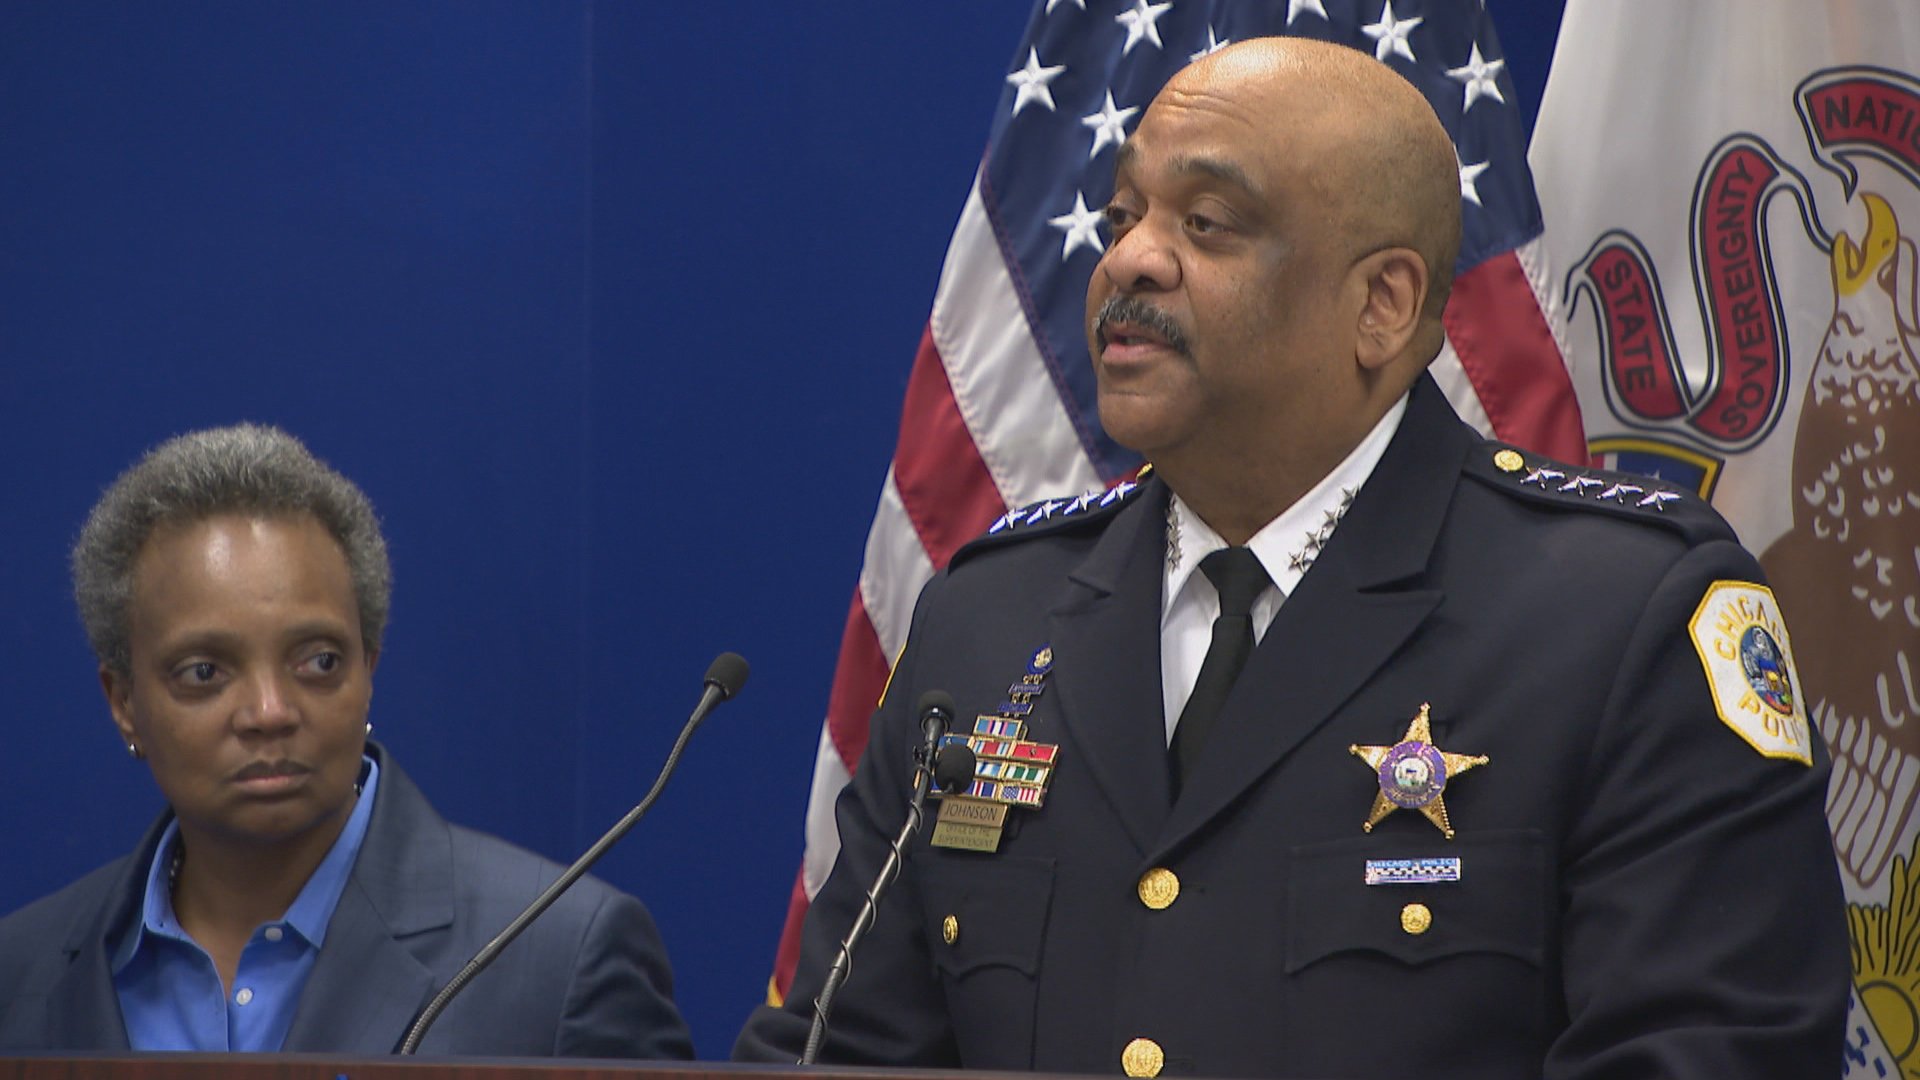 Chicago Police Superintendent Eddie Johnson announces his retirement during a press conference at police headquarters on Thursday, Nov. 7, 2019. Less than a month later, Mayor Lori Lightfoot fired Johnson during a surprise announcement on Monday, Dec. 2, 2019. (WTTW News)